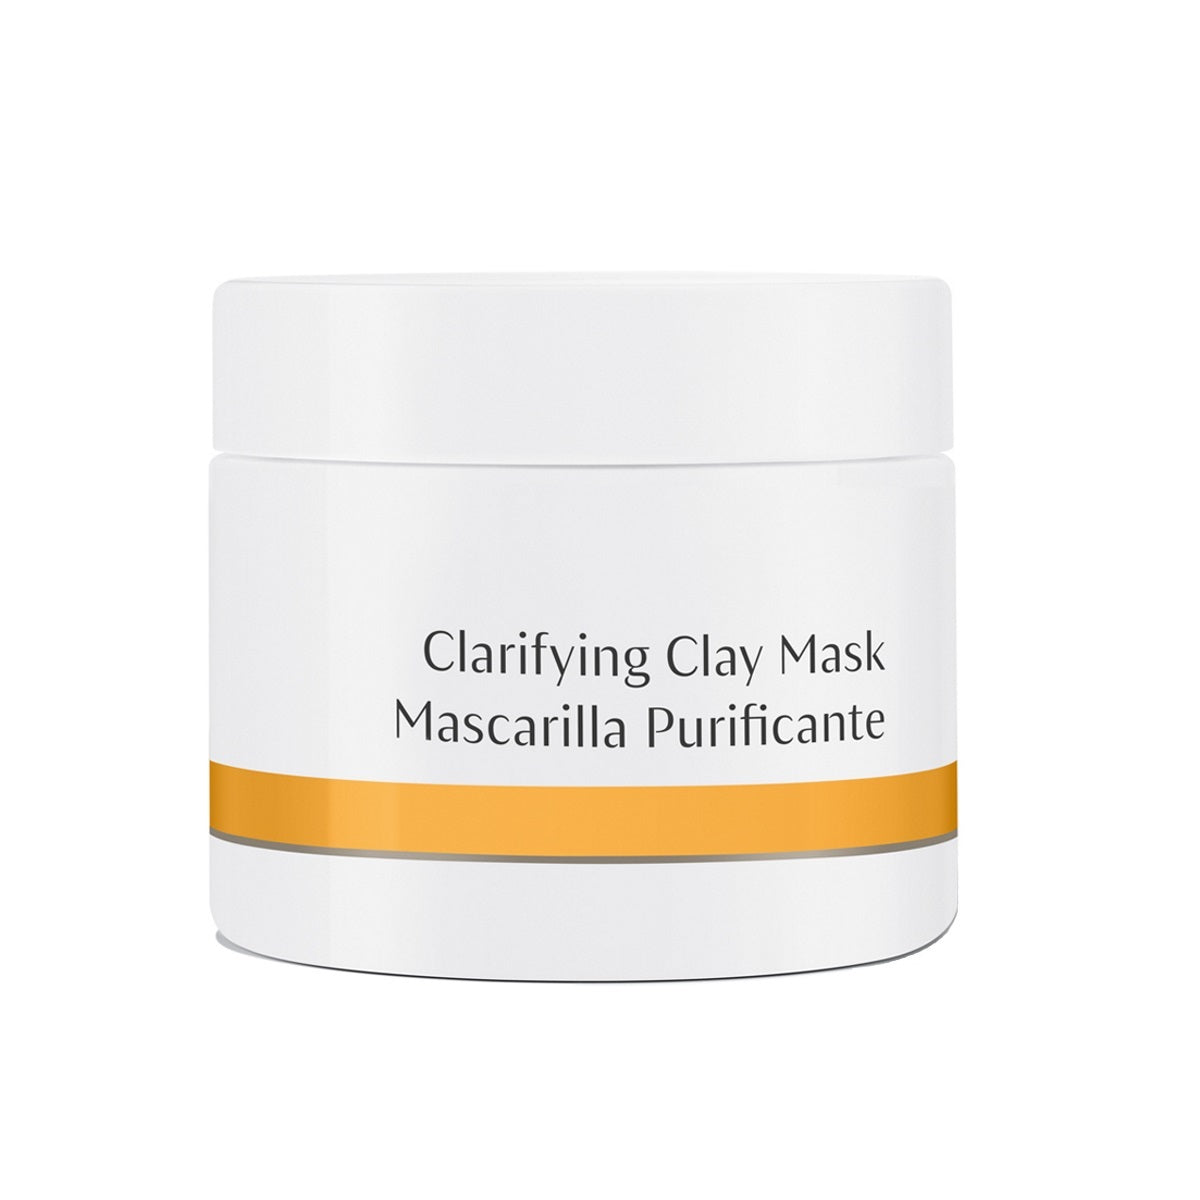 Primary image of Clarifying Clay Mask